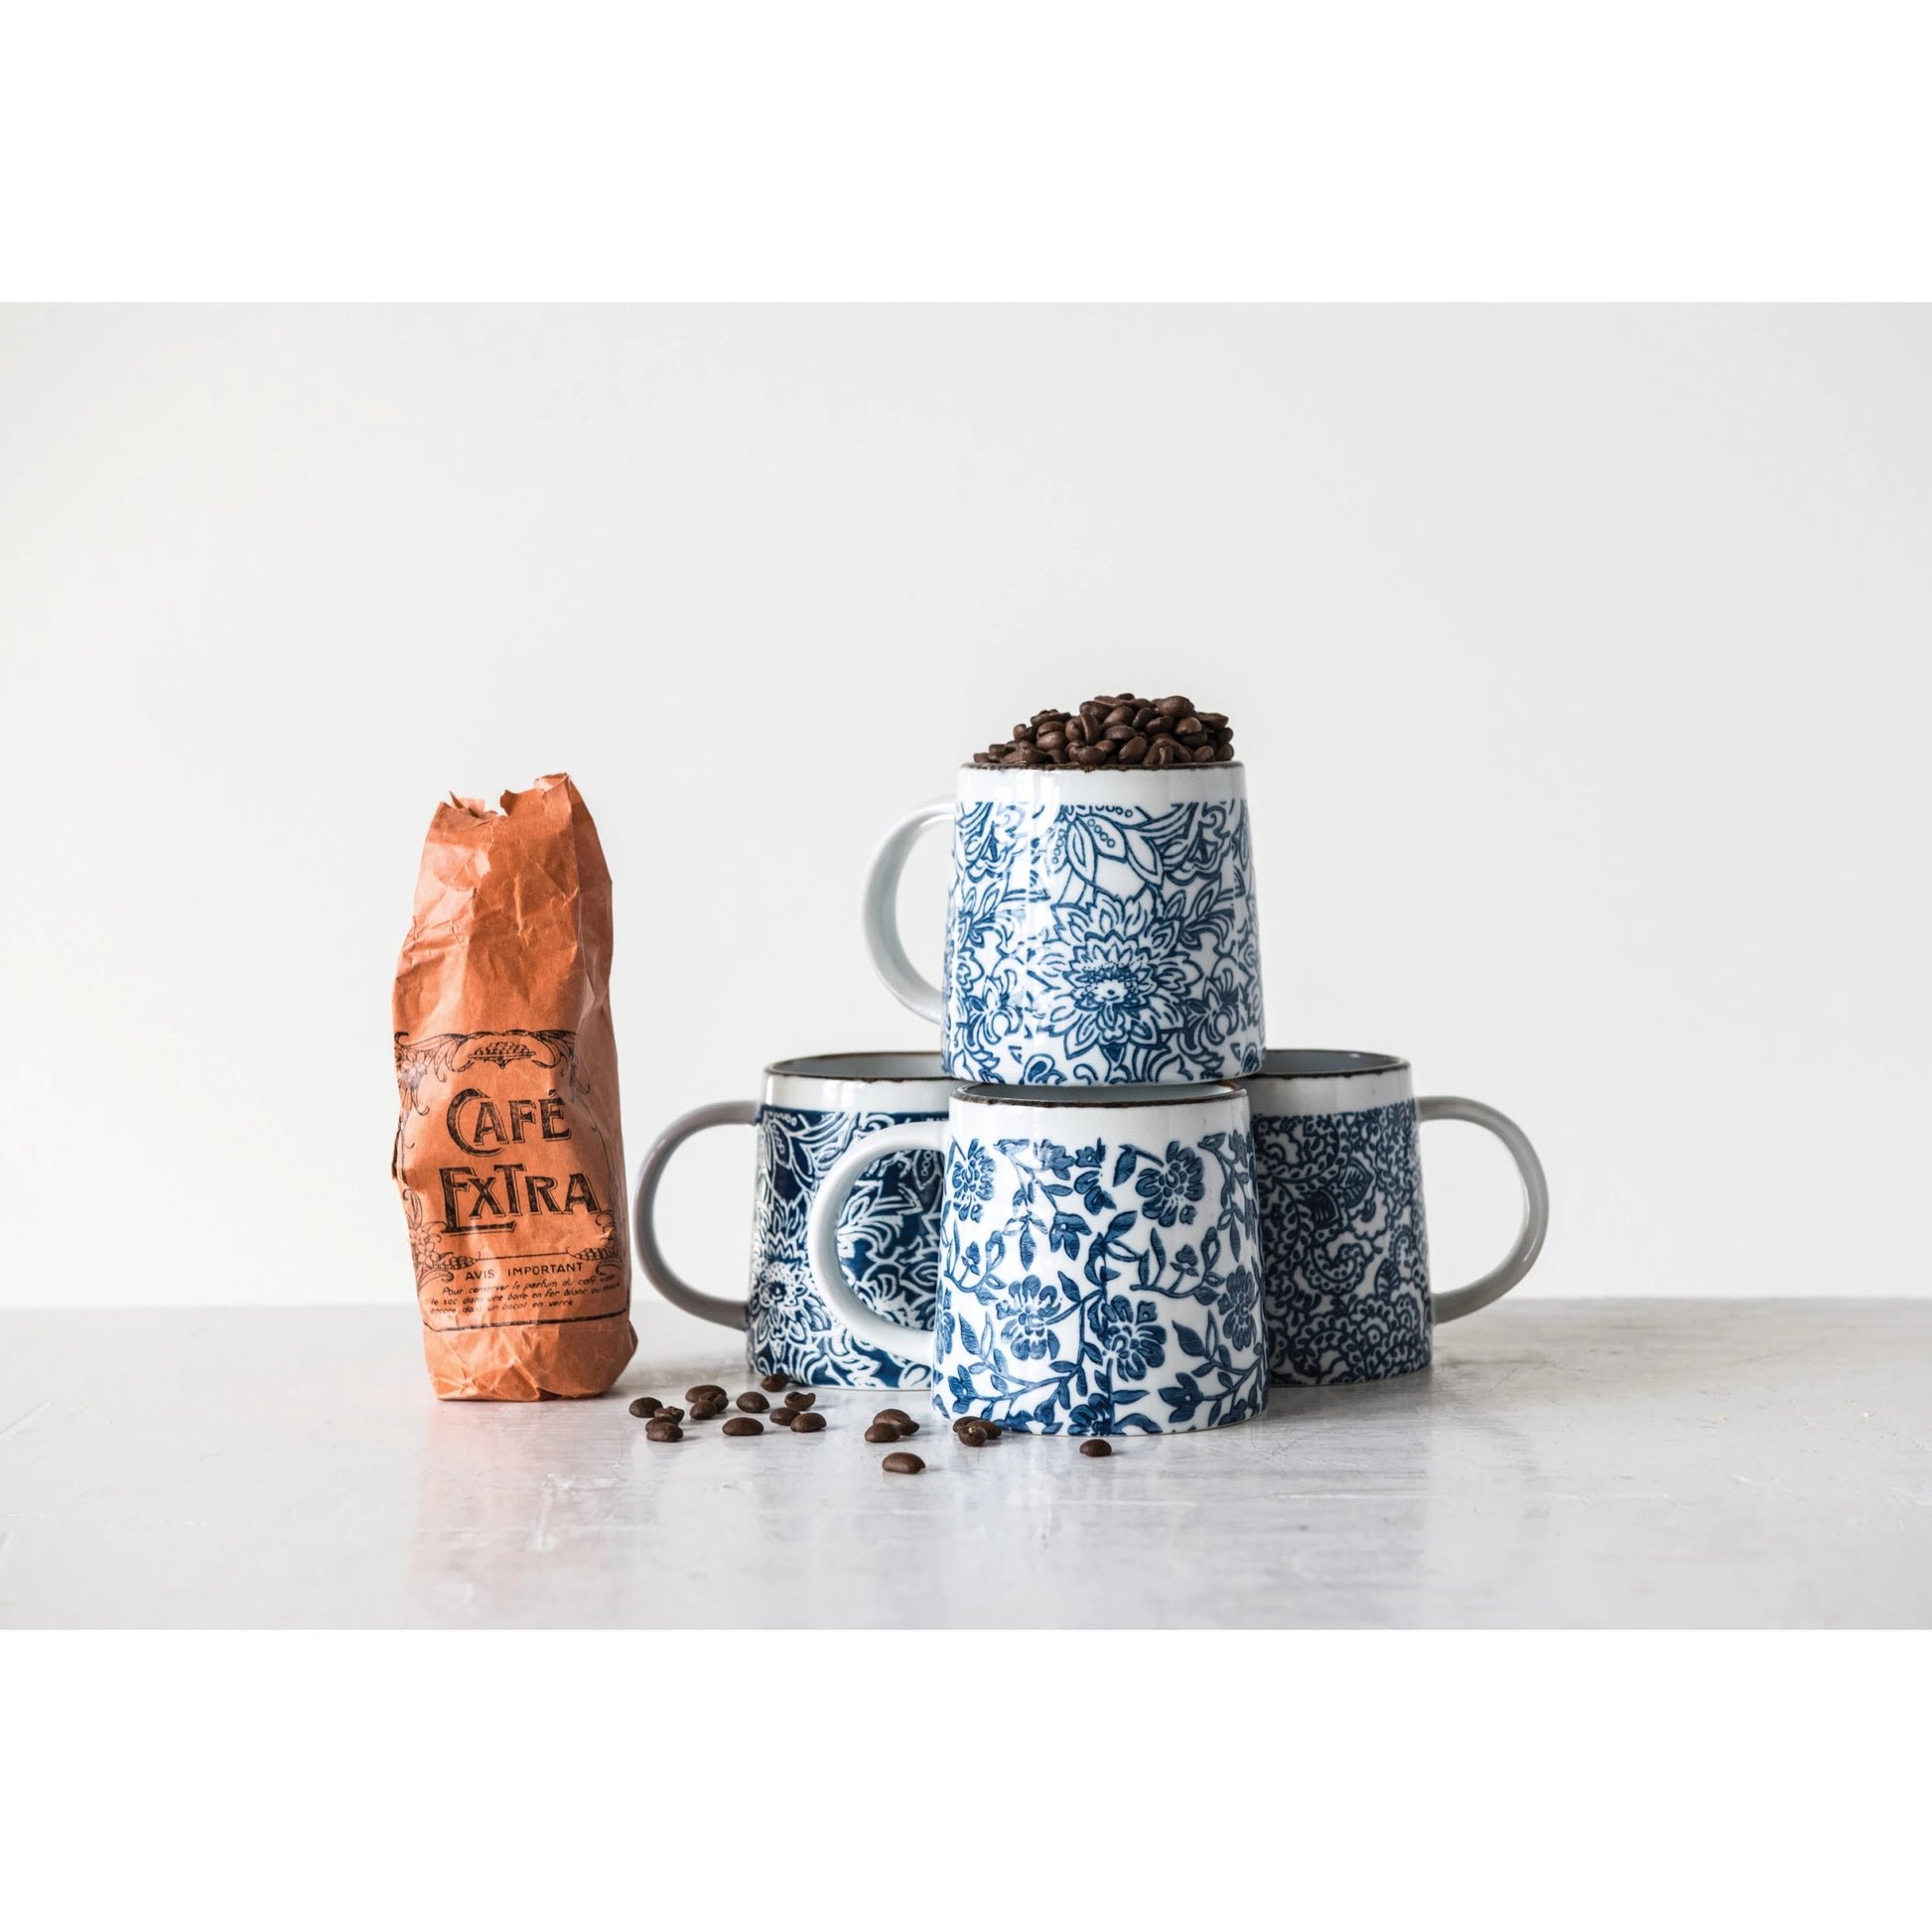 4 blue patterned mug stacked and arranged with a bag of coffee and coffee beans scattered along a table.